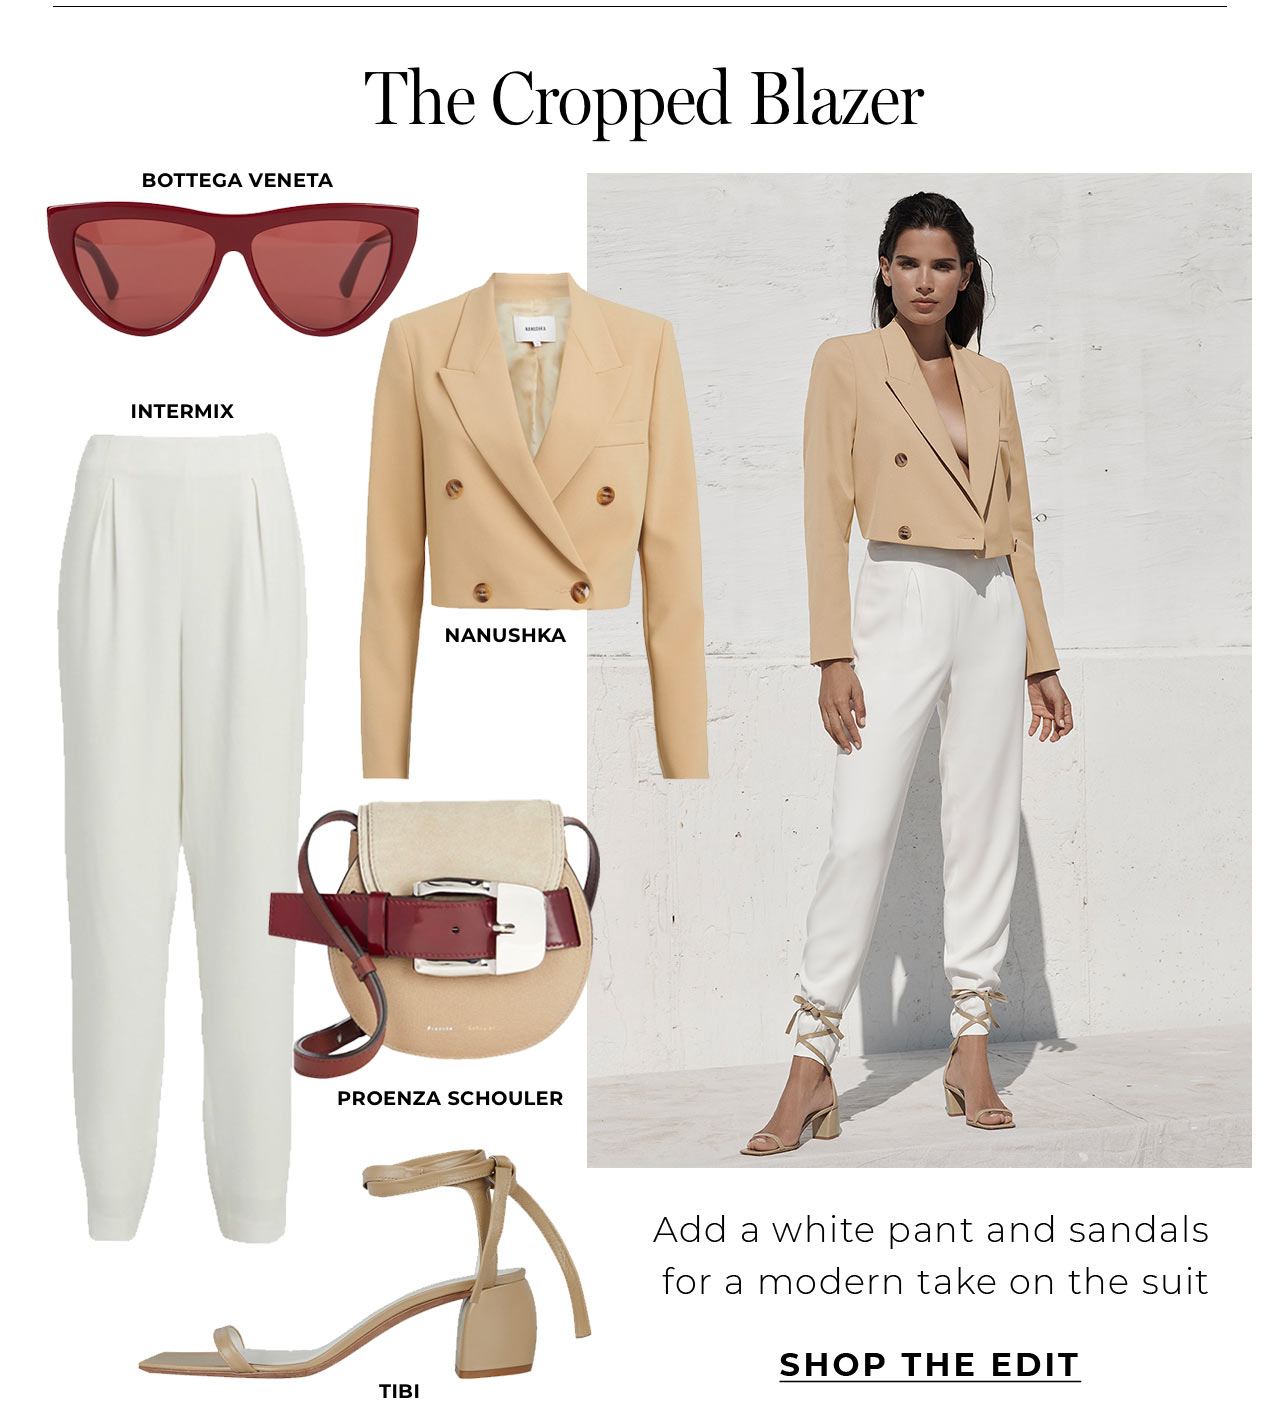 A cropped blazer and white pant is a modern take on the suit